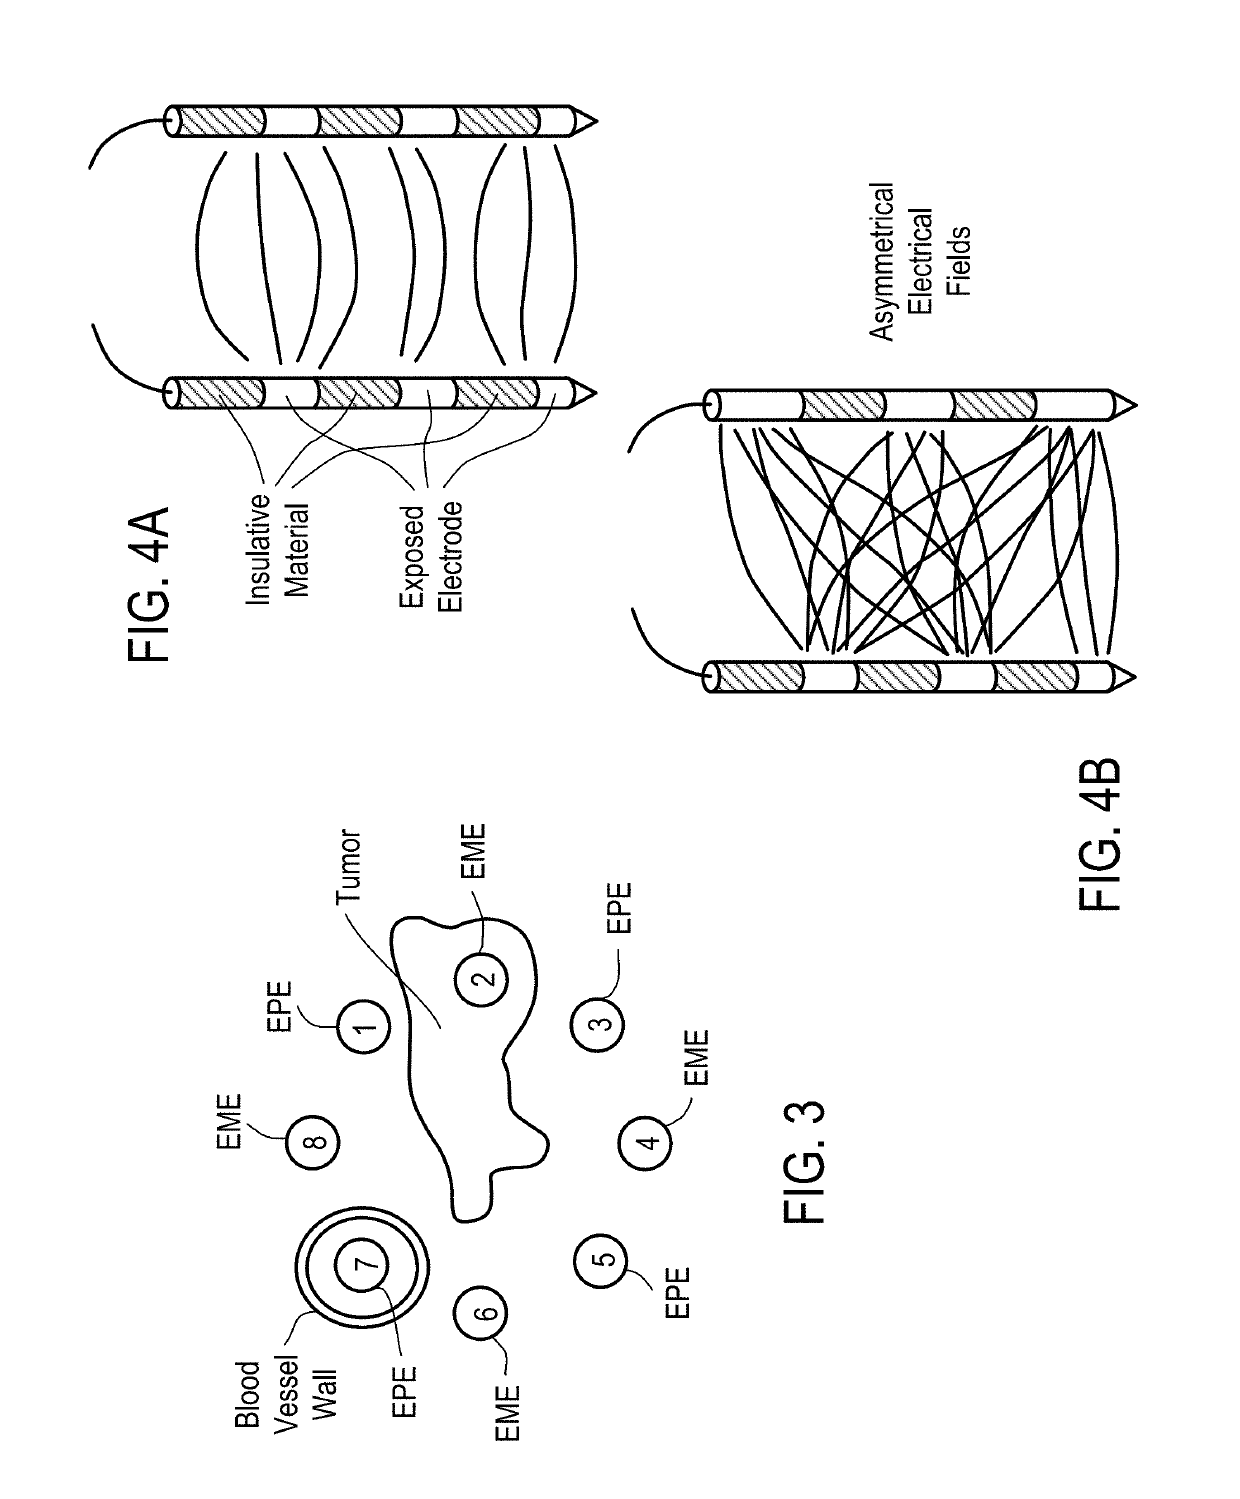 Systems and Methods for Improved Tissue-Sensing Based Electroporation